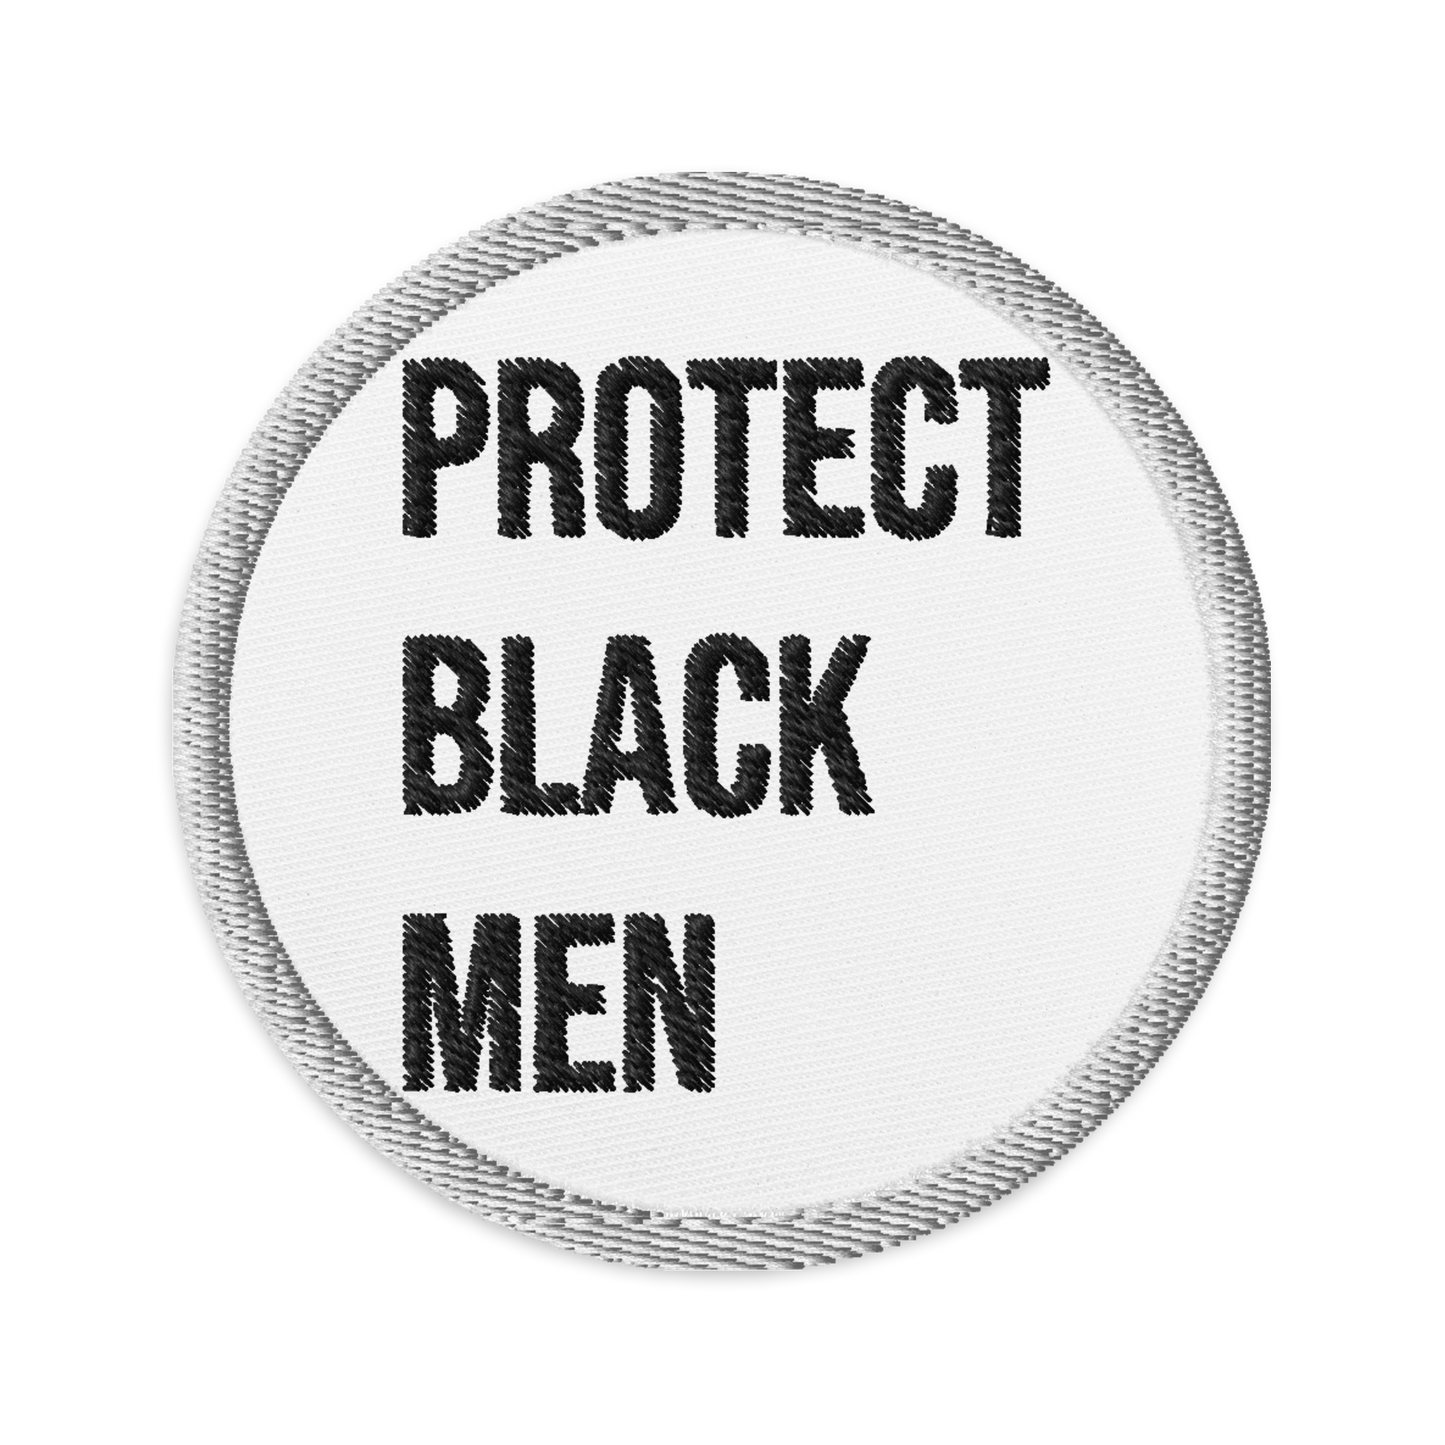 Protect Black Men Embroidered Patch